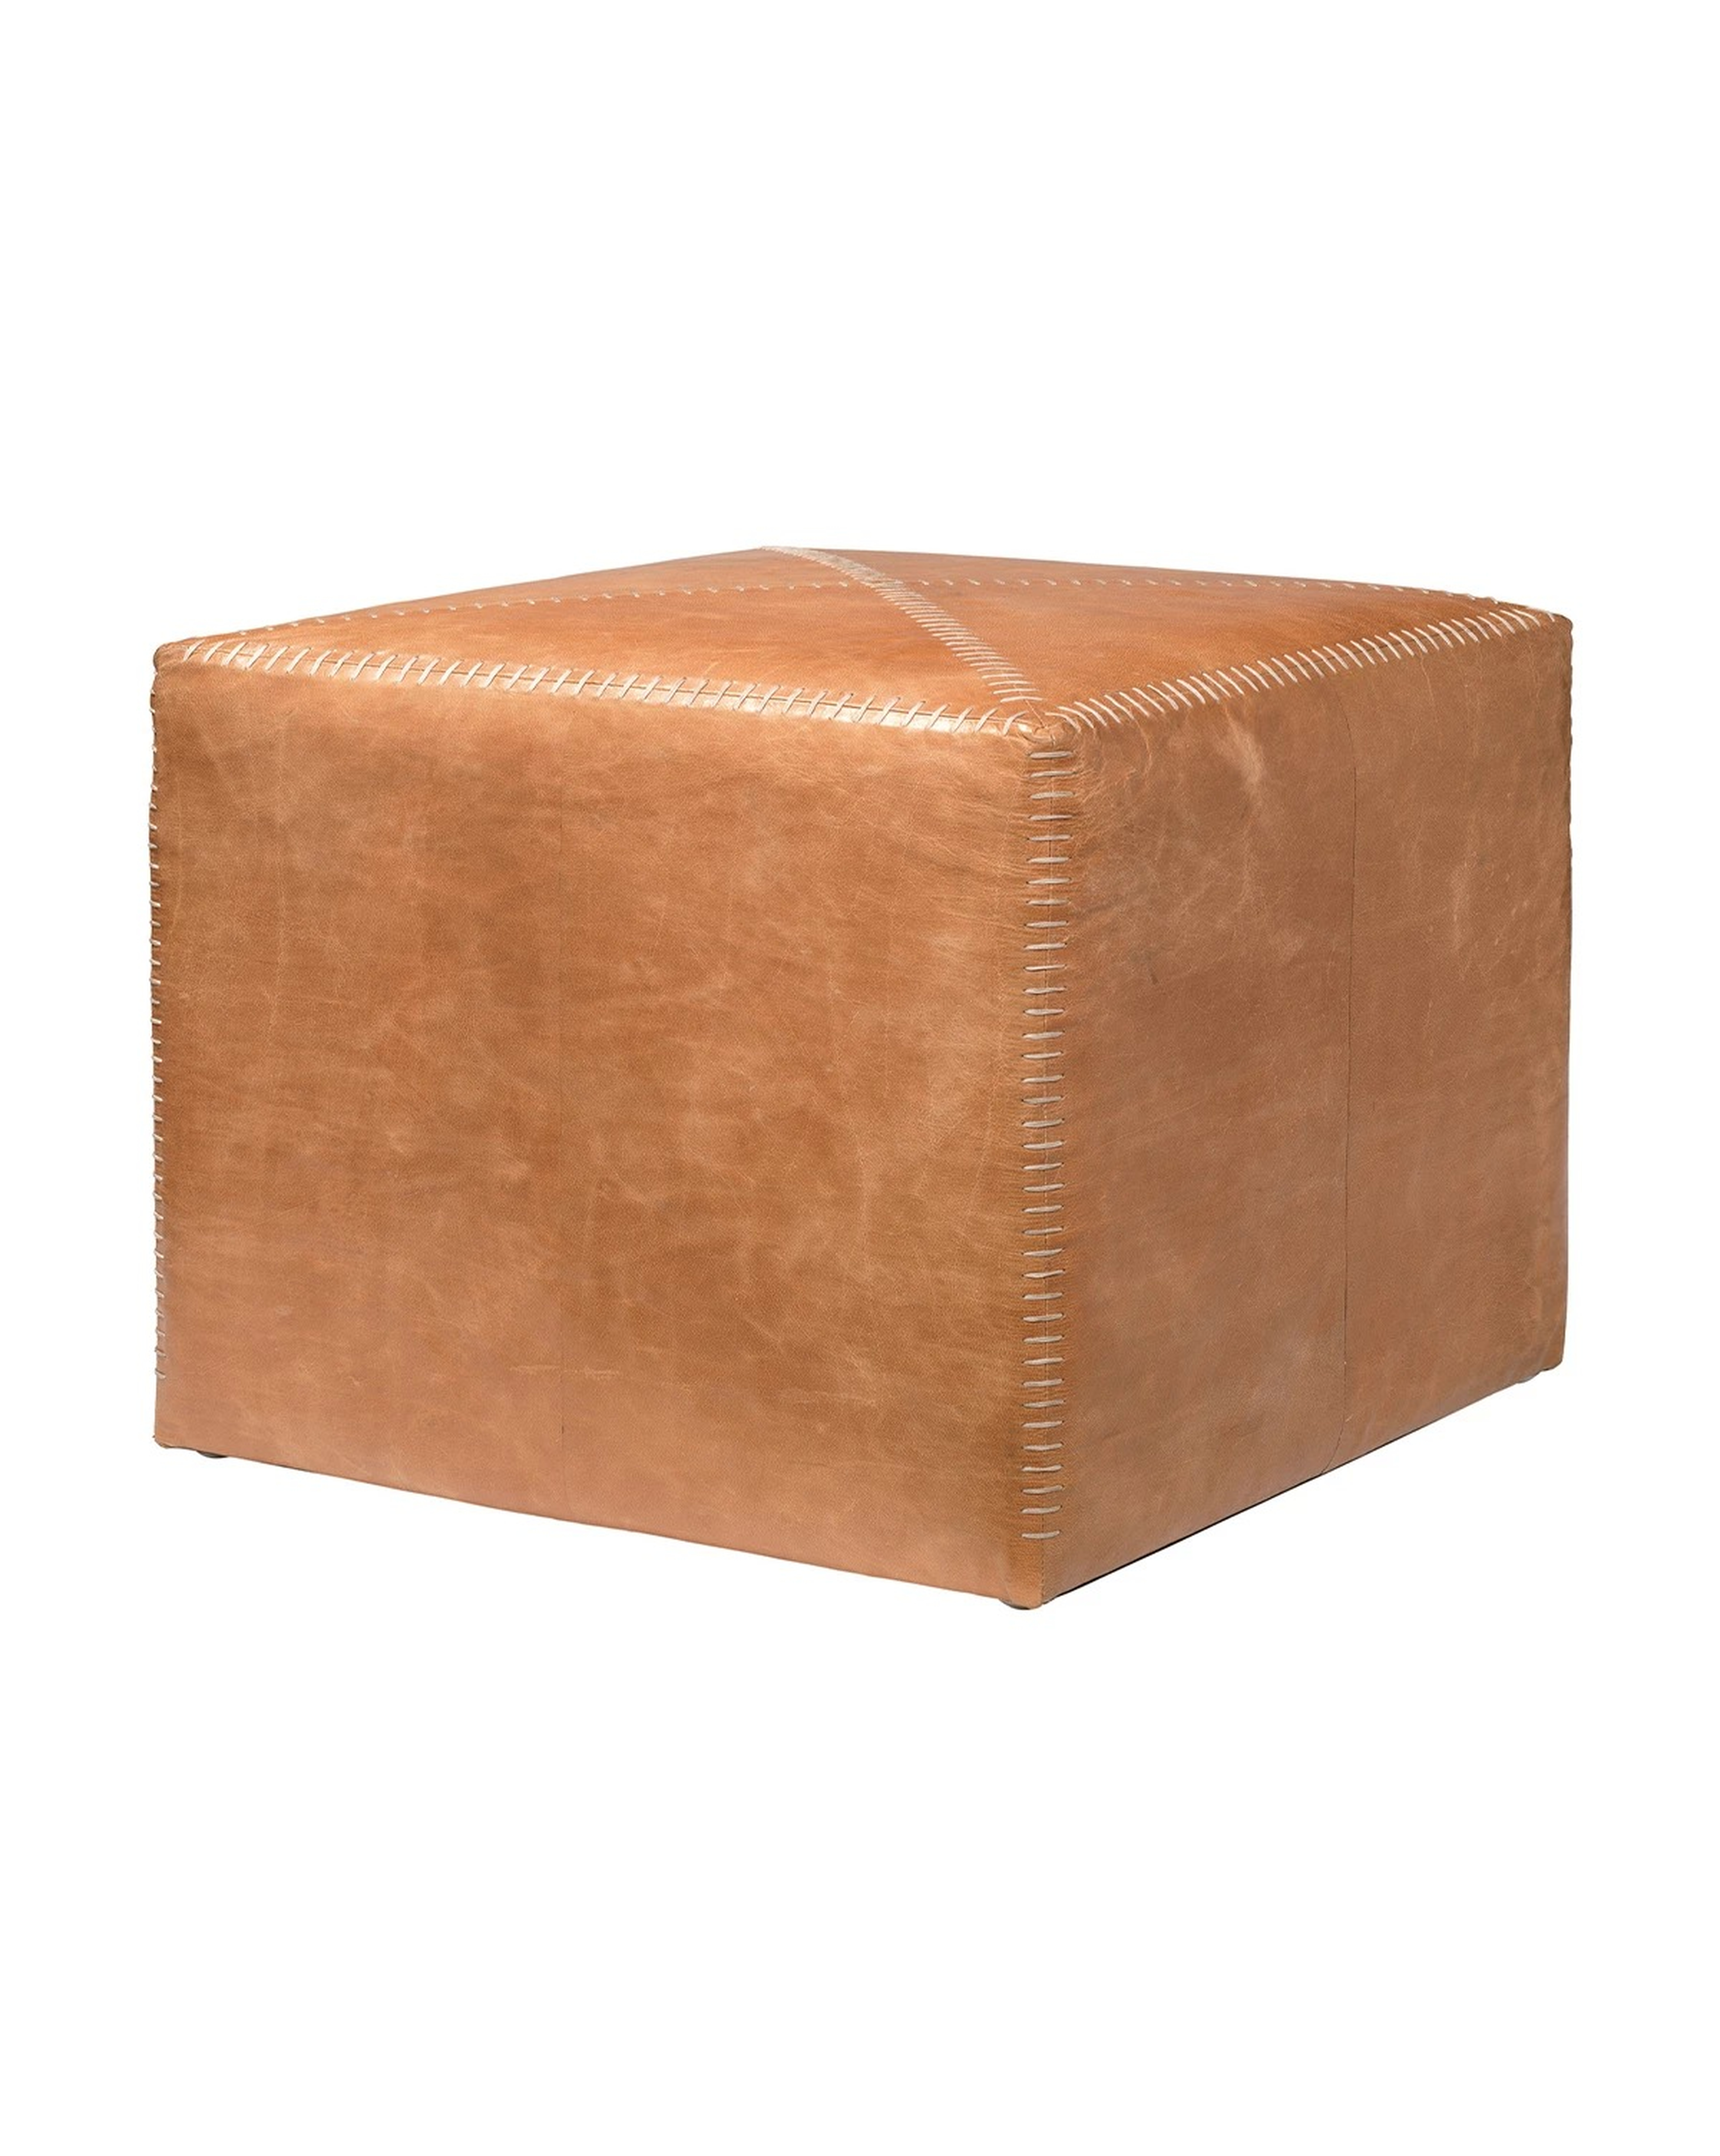 GABBY LEATHER OTTOMAN - SMALL - McGee & Co.